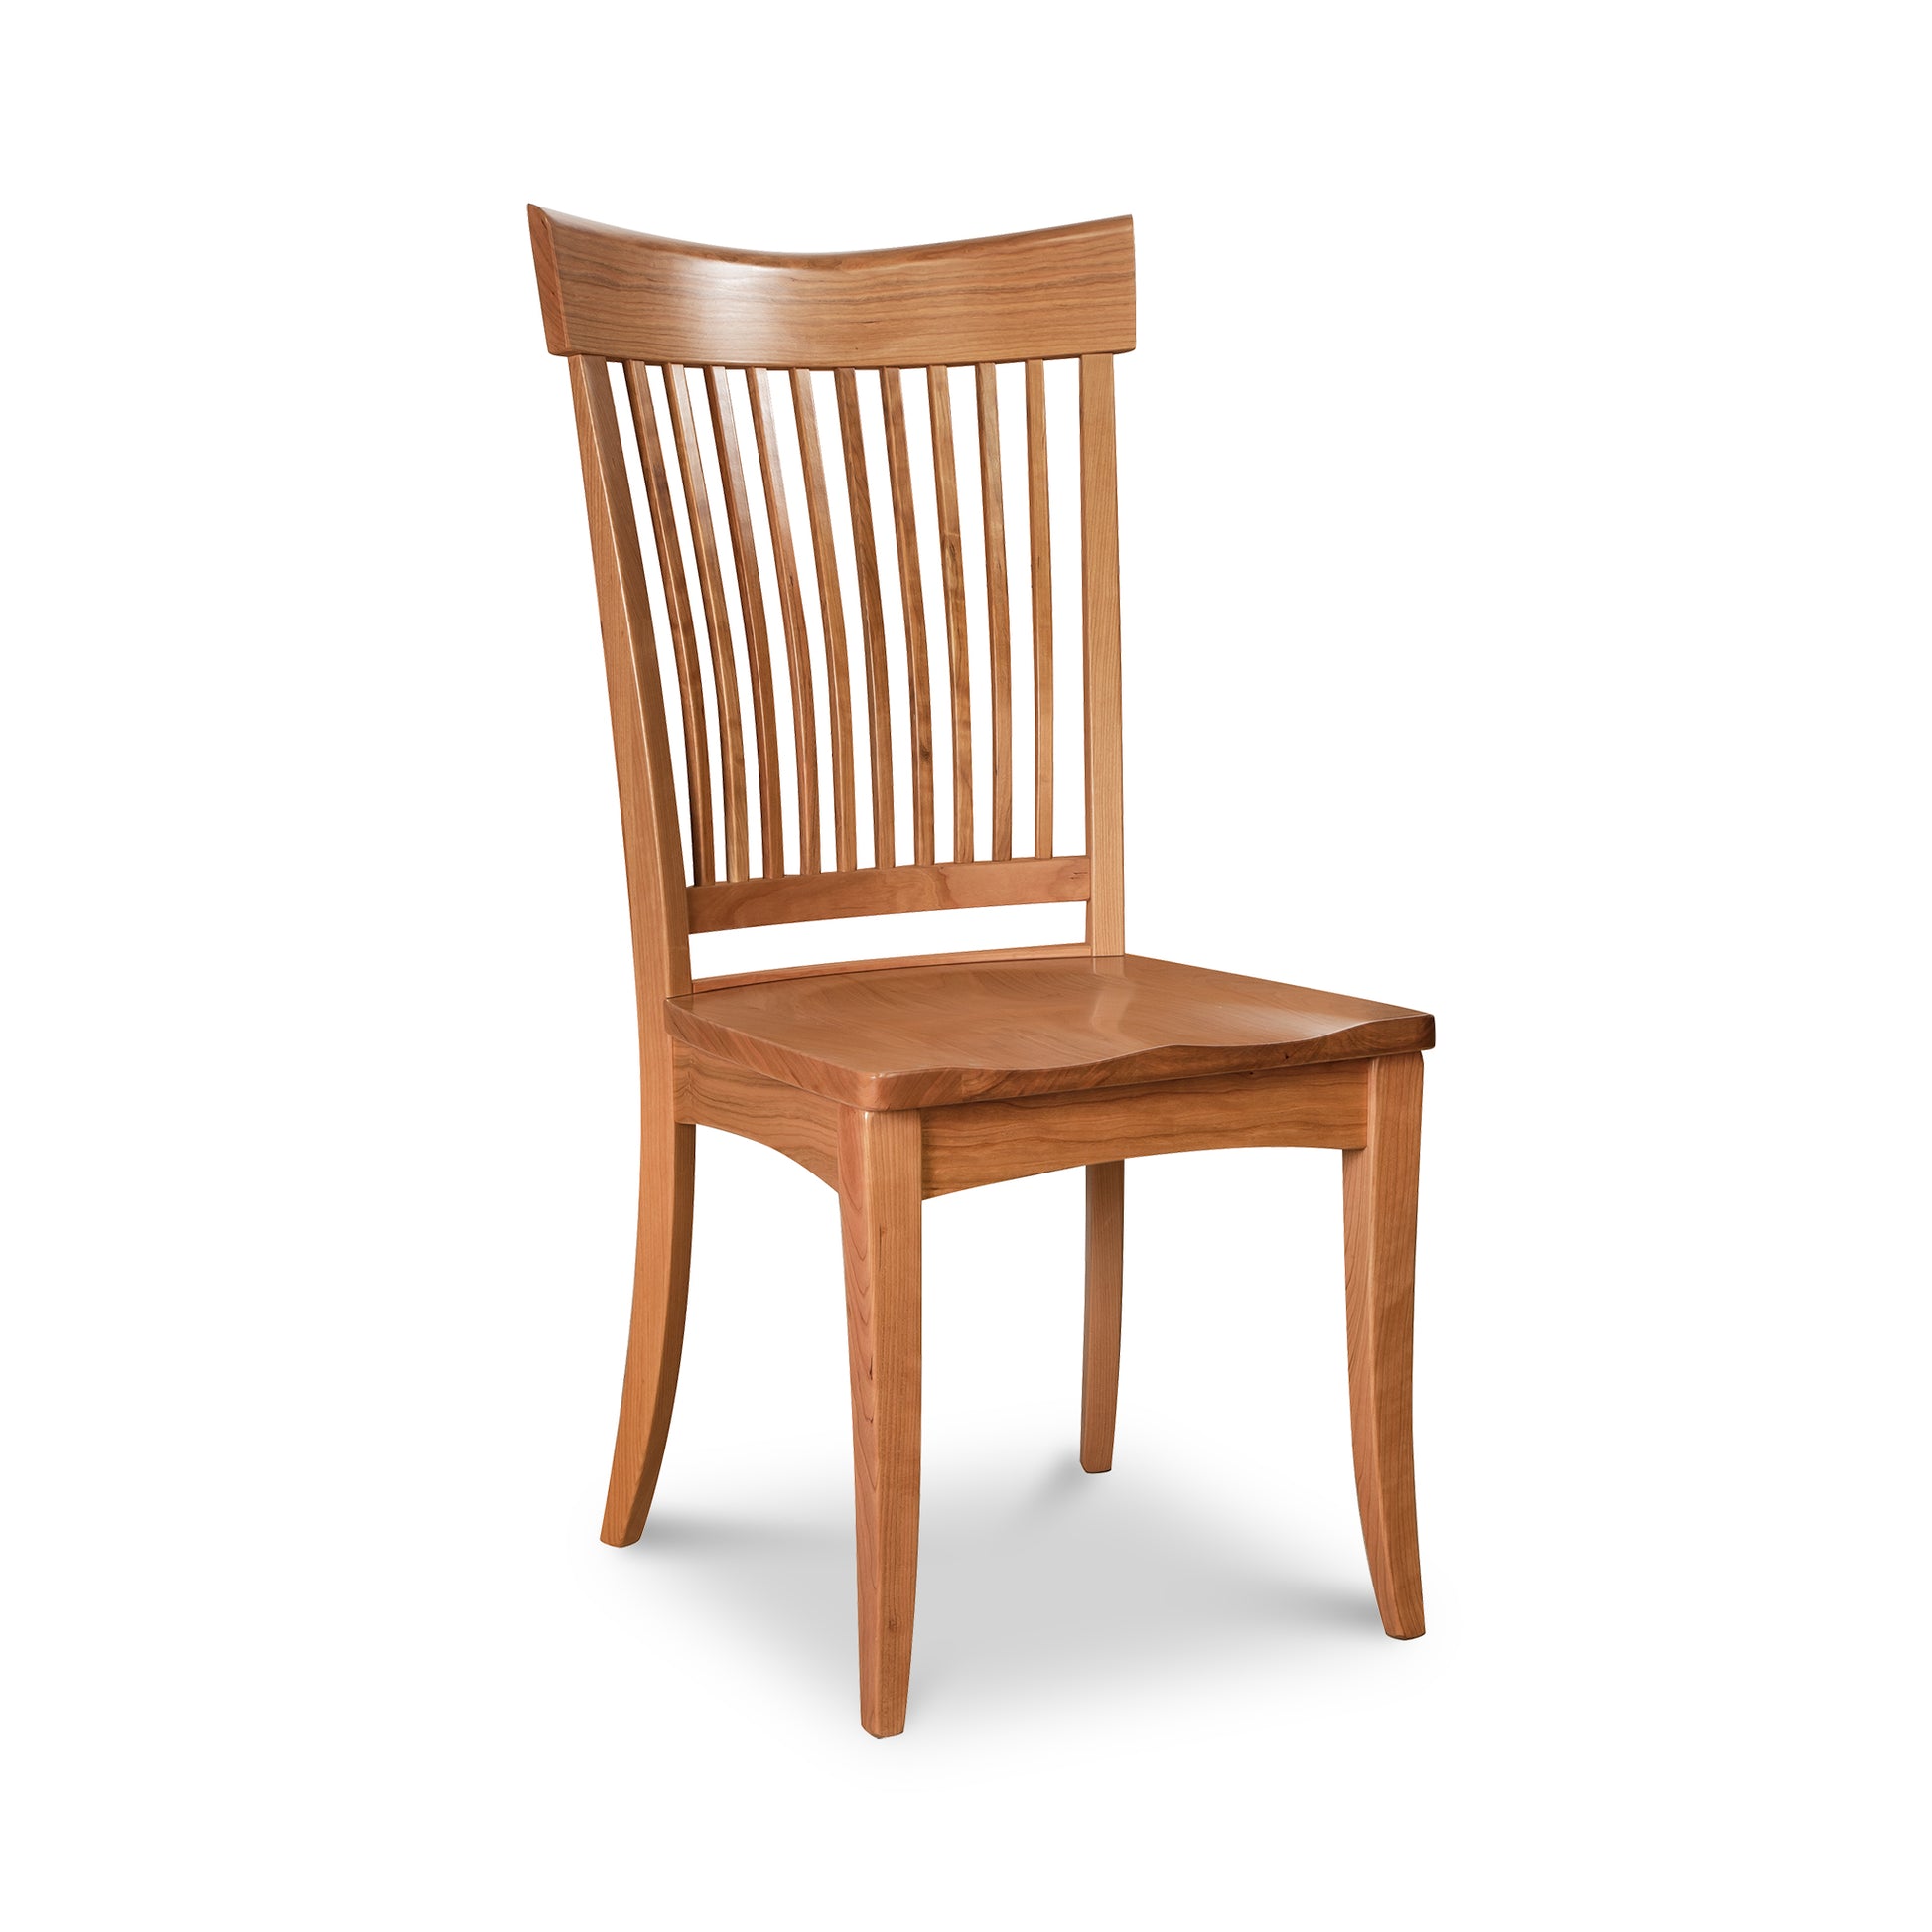 A wooden dining chair with a slatted back.